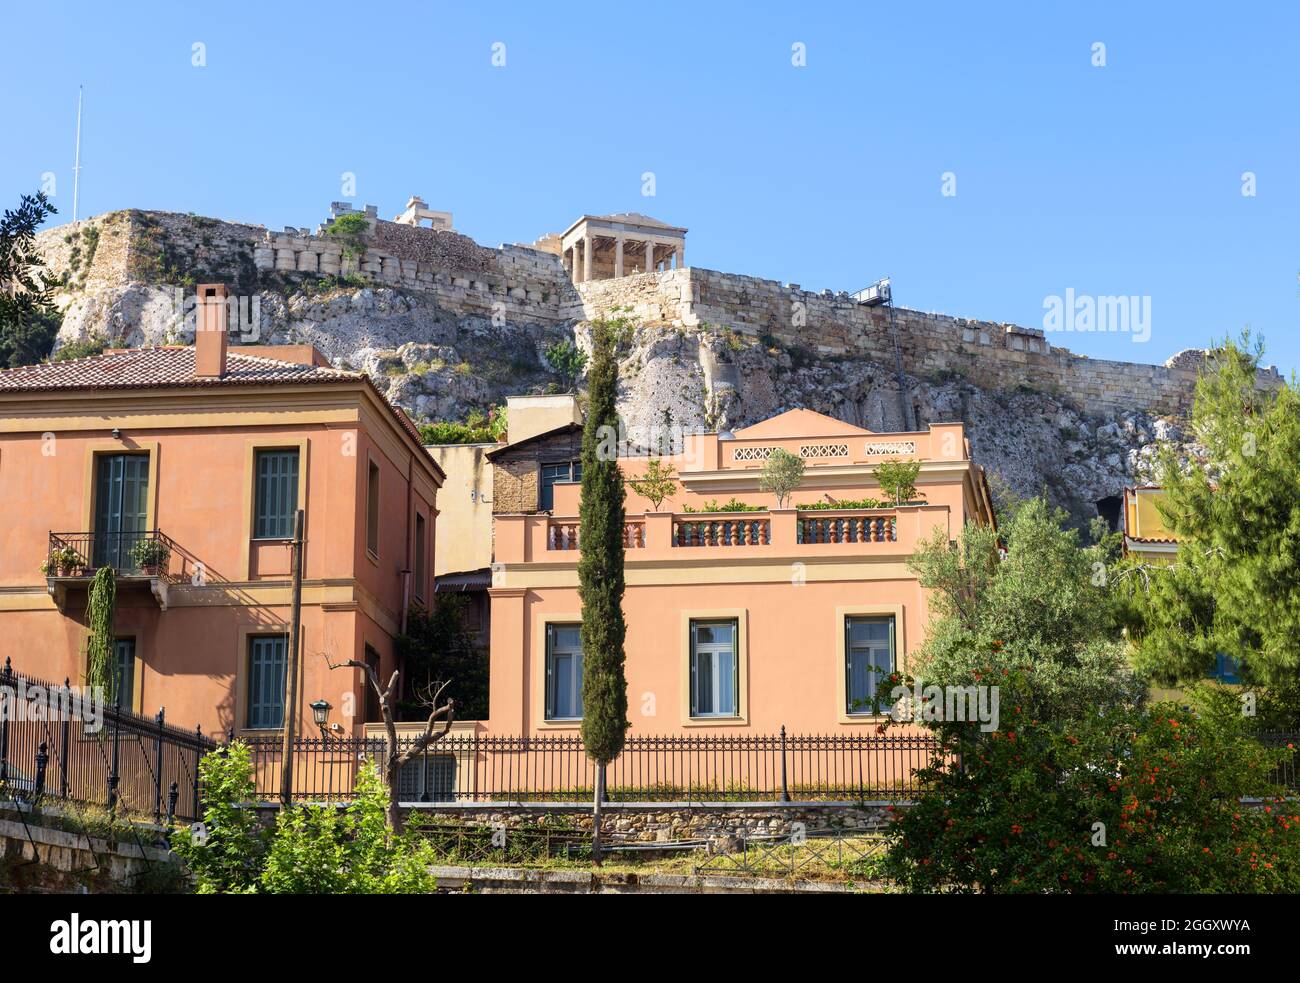 Acropolis rises over houses in Plaka district, Athens, Greece, Europe. This place is tourist attraction of Athens. View of international landmark in A Stock Photo